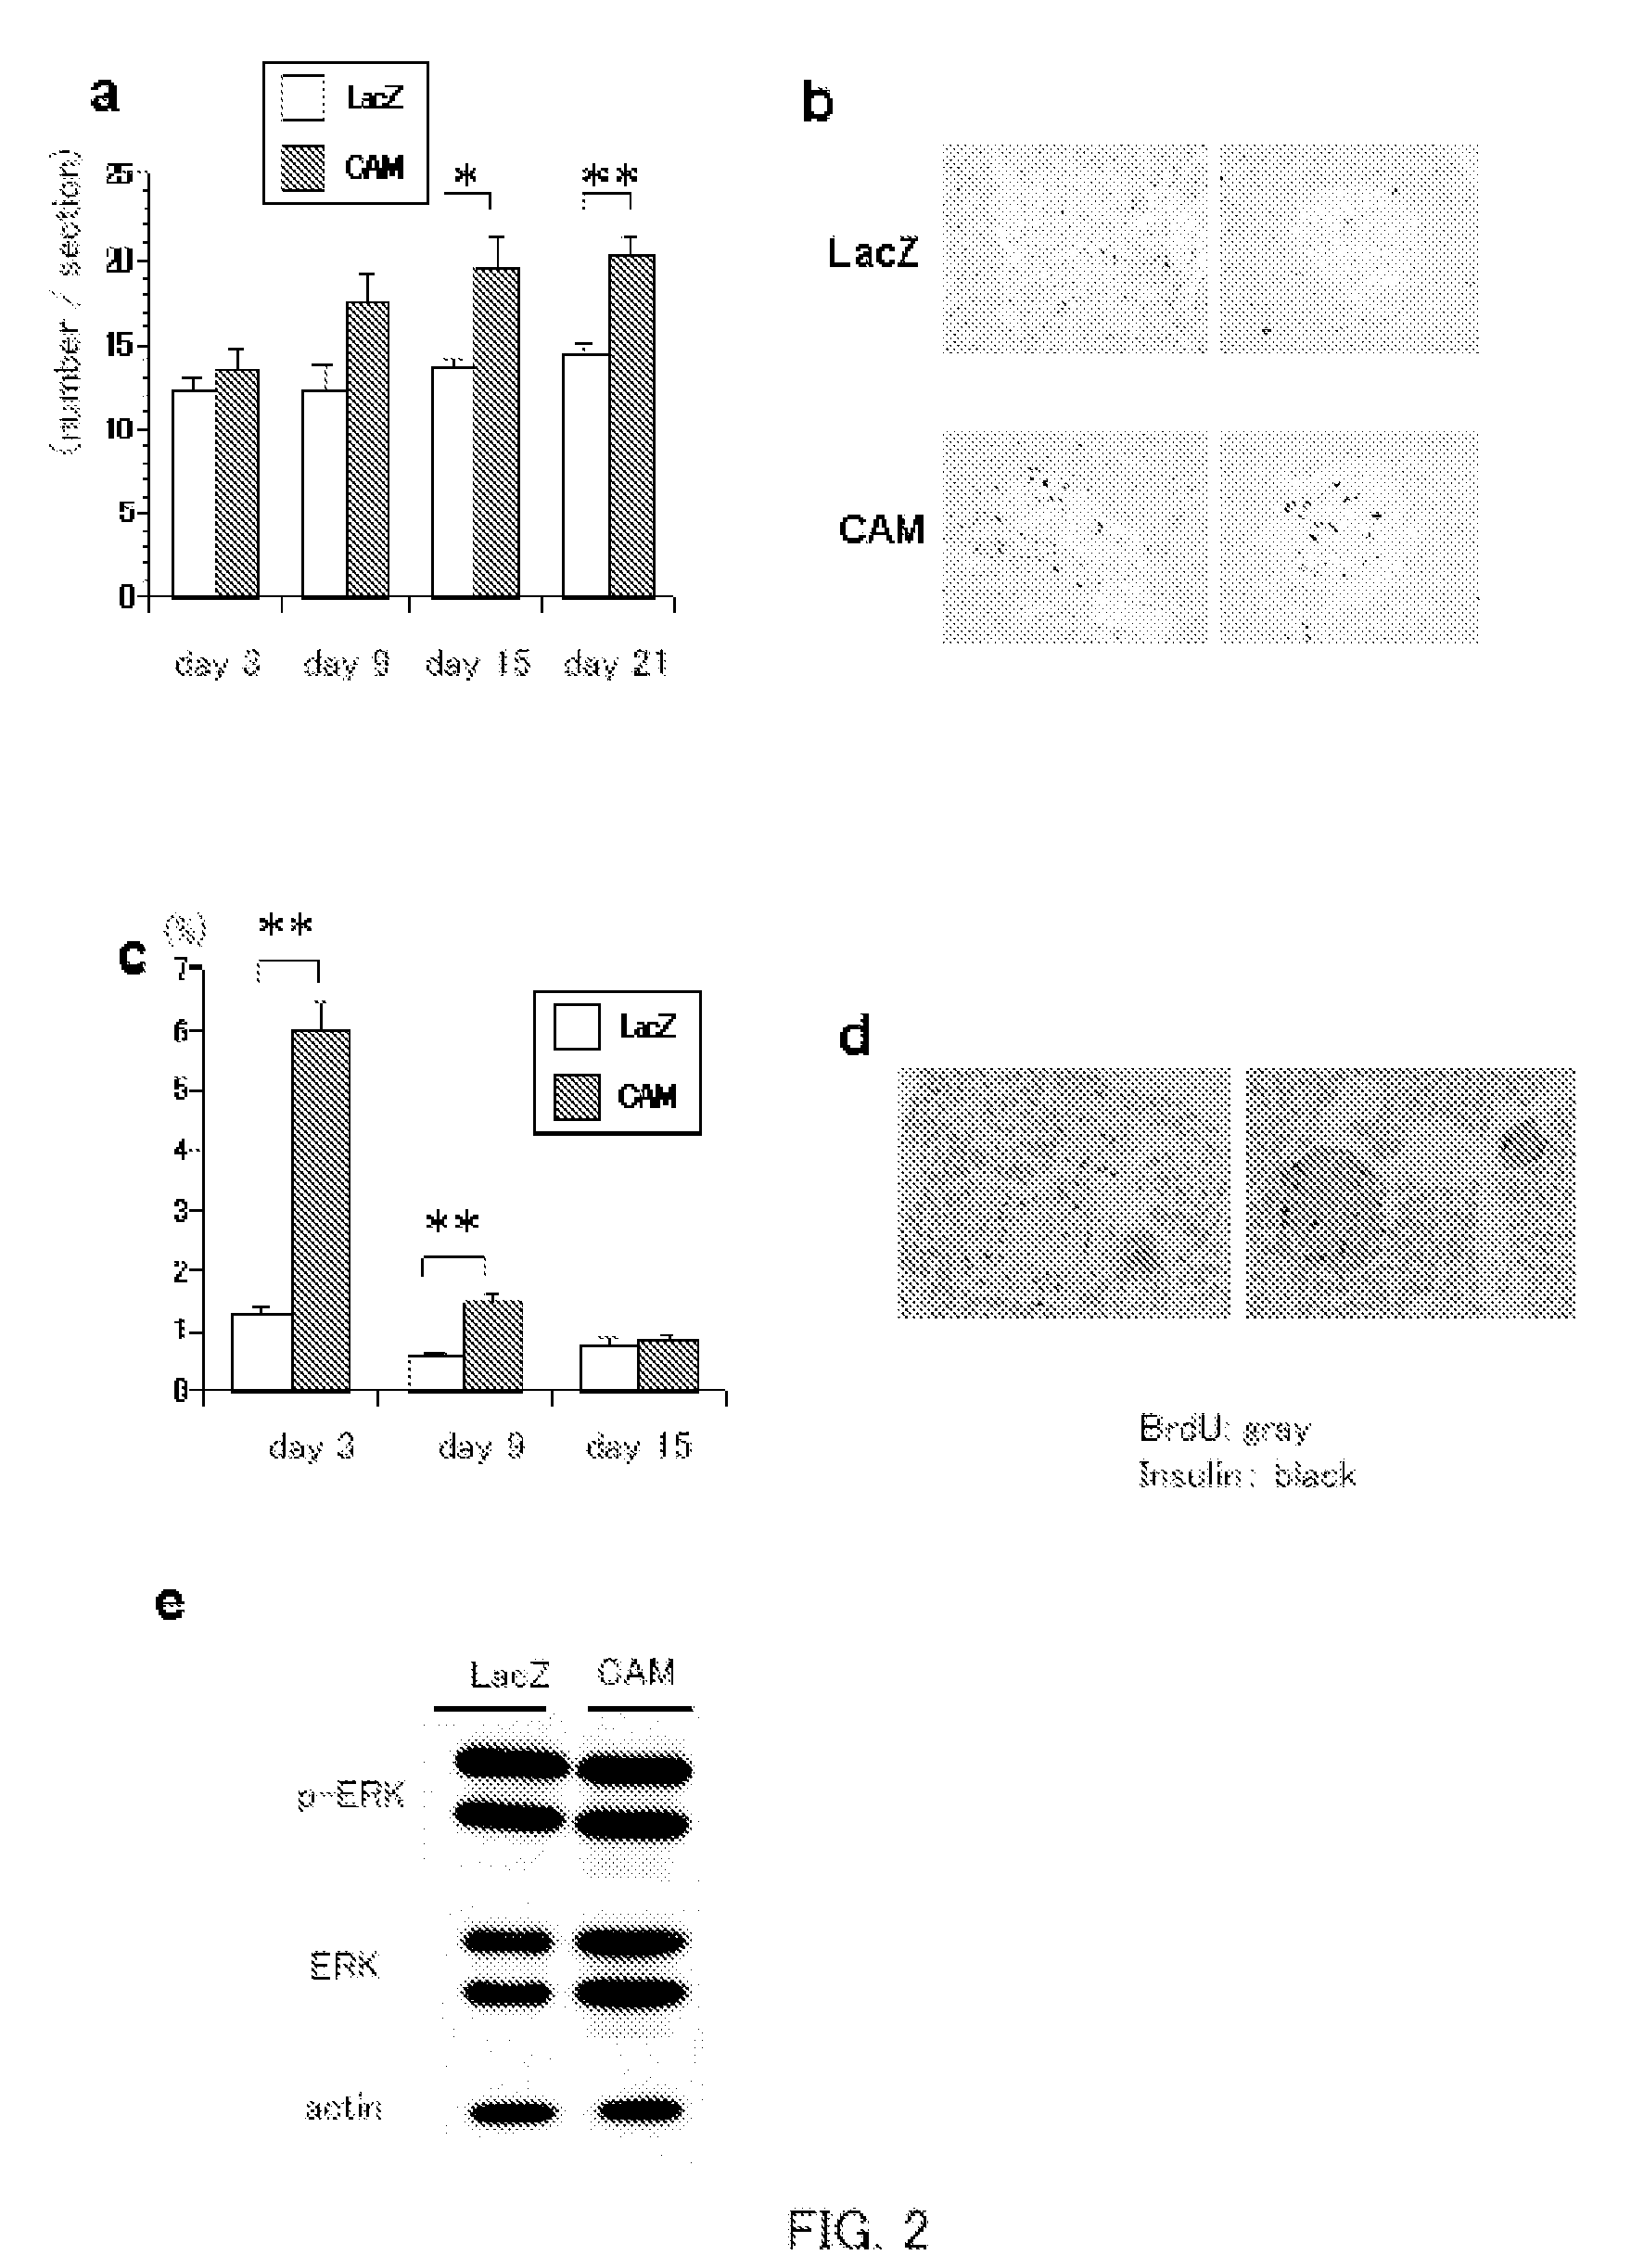 Method for Enhancing Pancreatic Beta Cell Proliferation, Increasing Serum Insulin Concentration, Decreasing Blood Glucose Concentration And Treating And/Or Preventing Diabetes